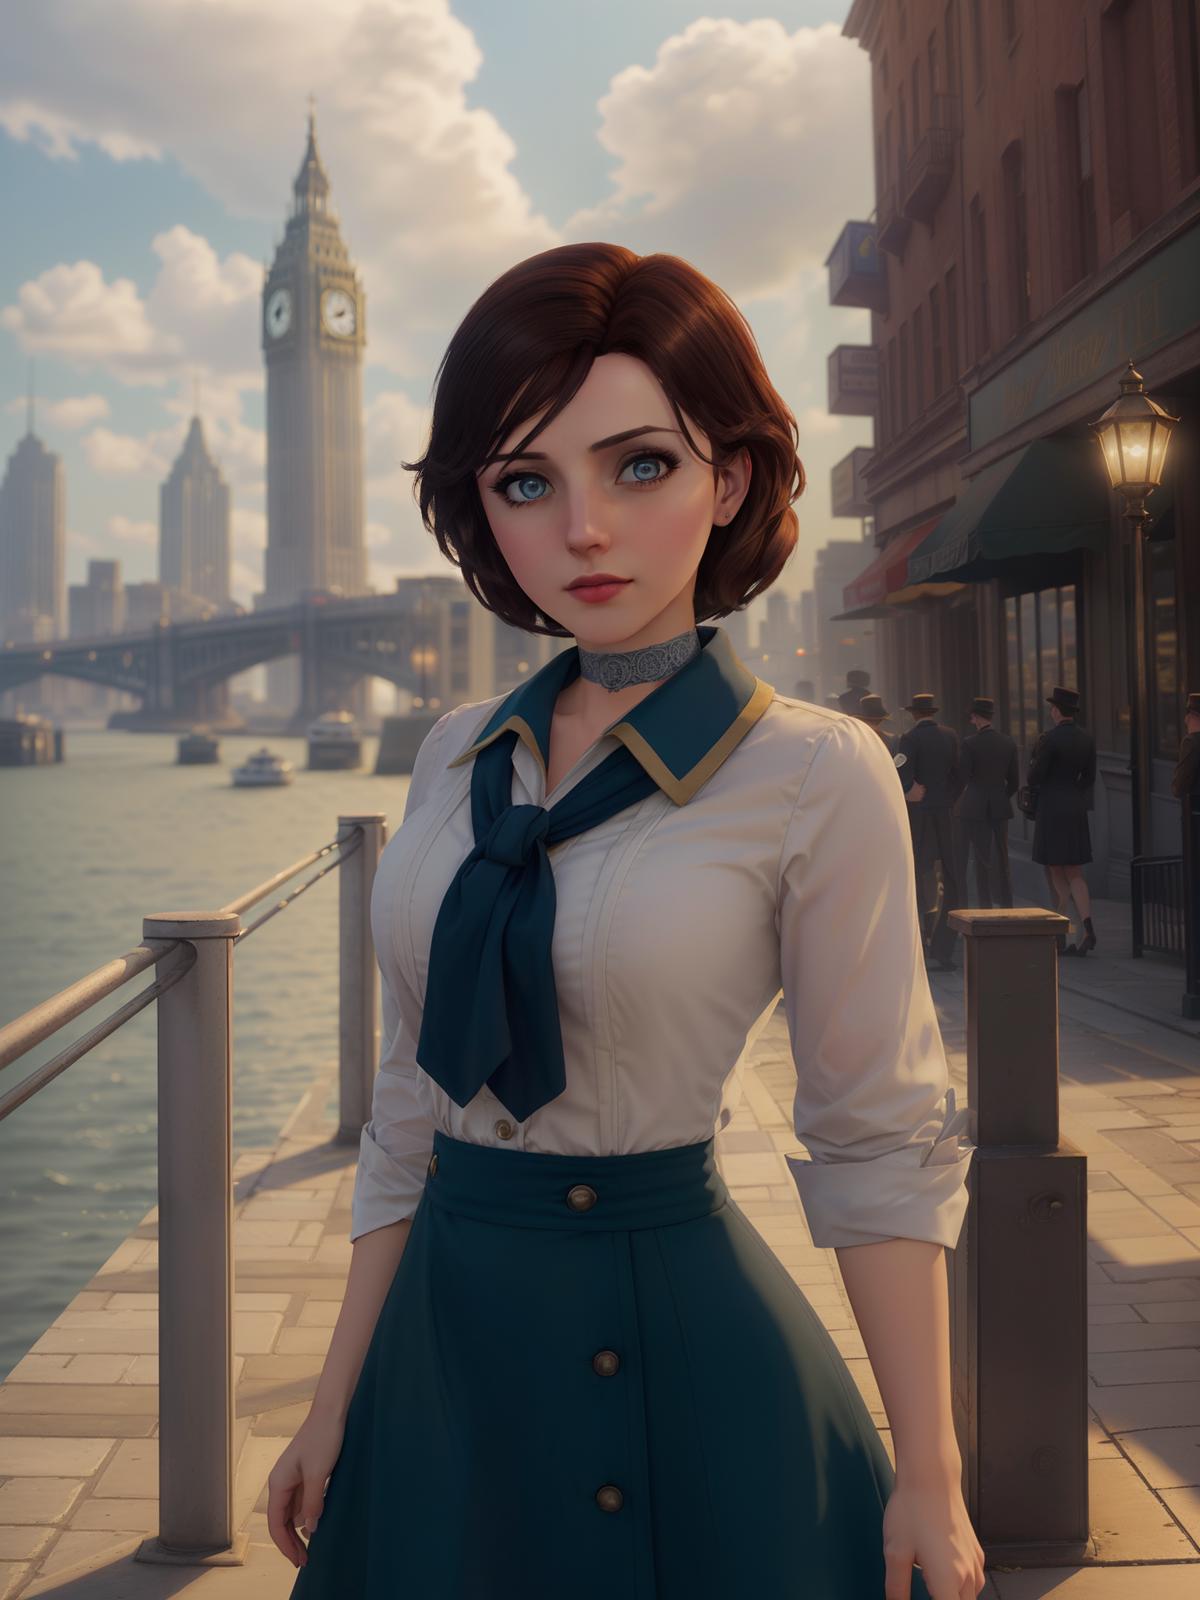 The characters from the game Bioshock Infinite in real, Stable Diffusion